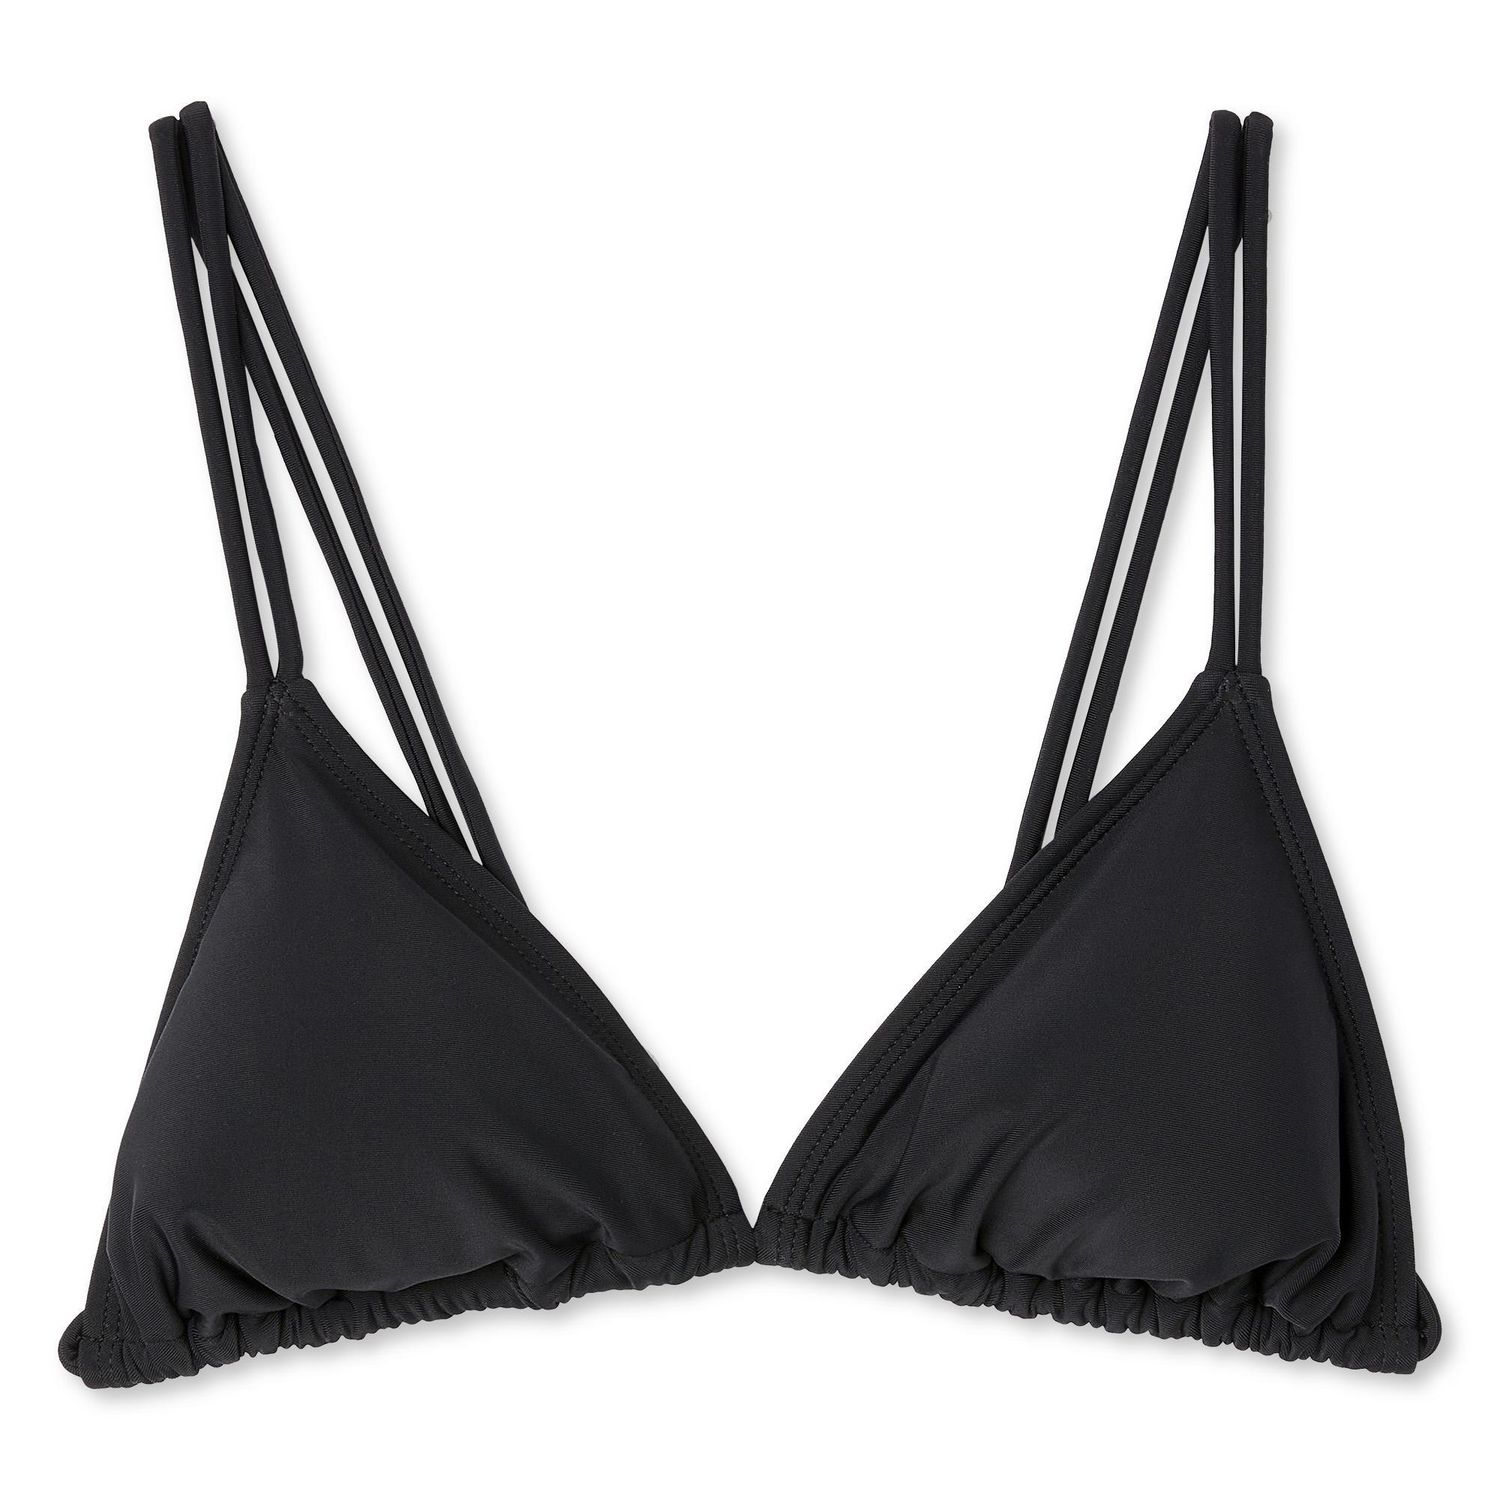 The Triangle Black Top